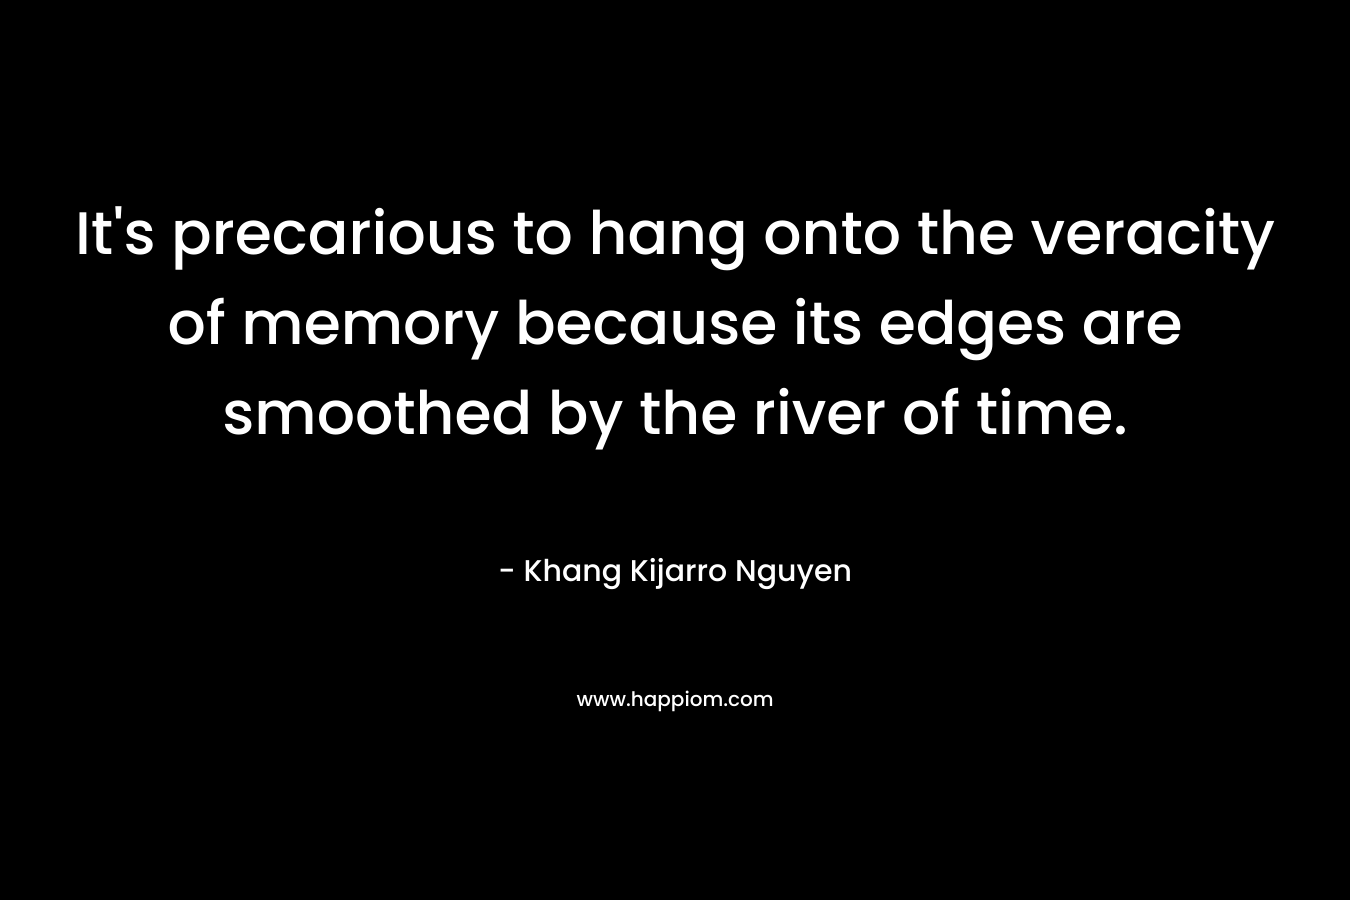 It's precarious to hang onto the veracity of memory because its edges are smoothed by the river of time.